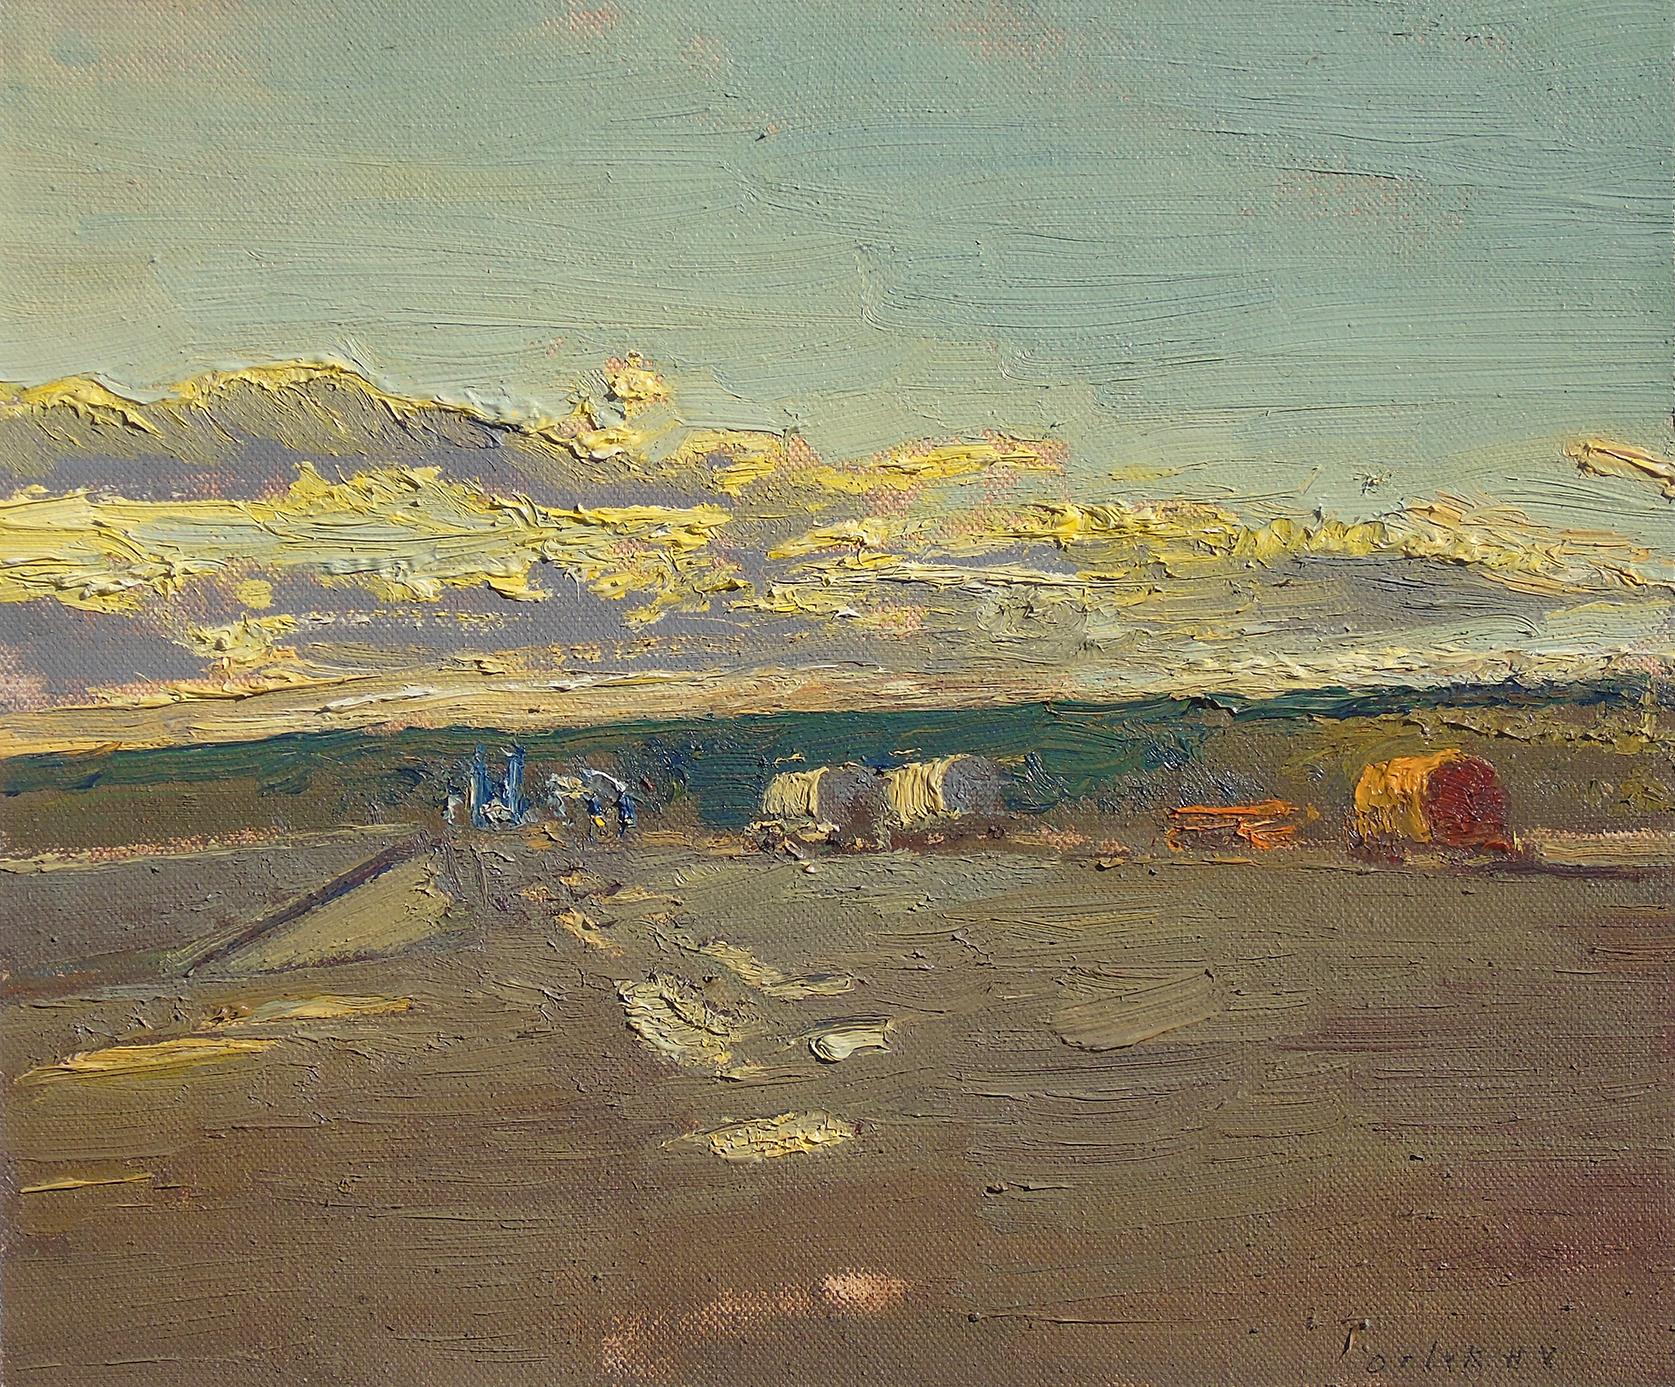 At the Slurry Pit: Impressionist En Plein Air Landscape of Hay Field at Sunset - Painting by Harry Orlyk